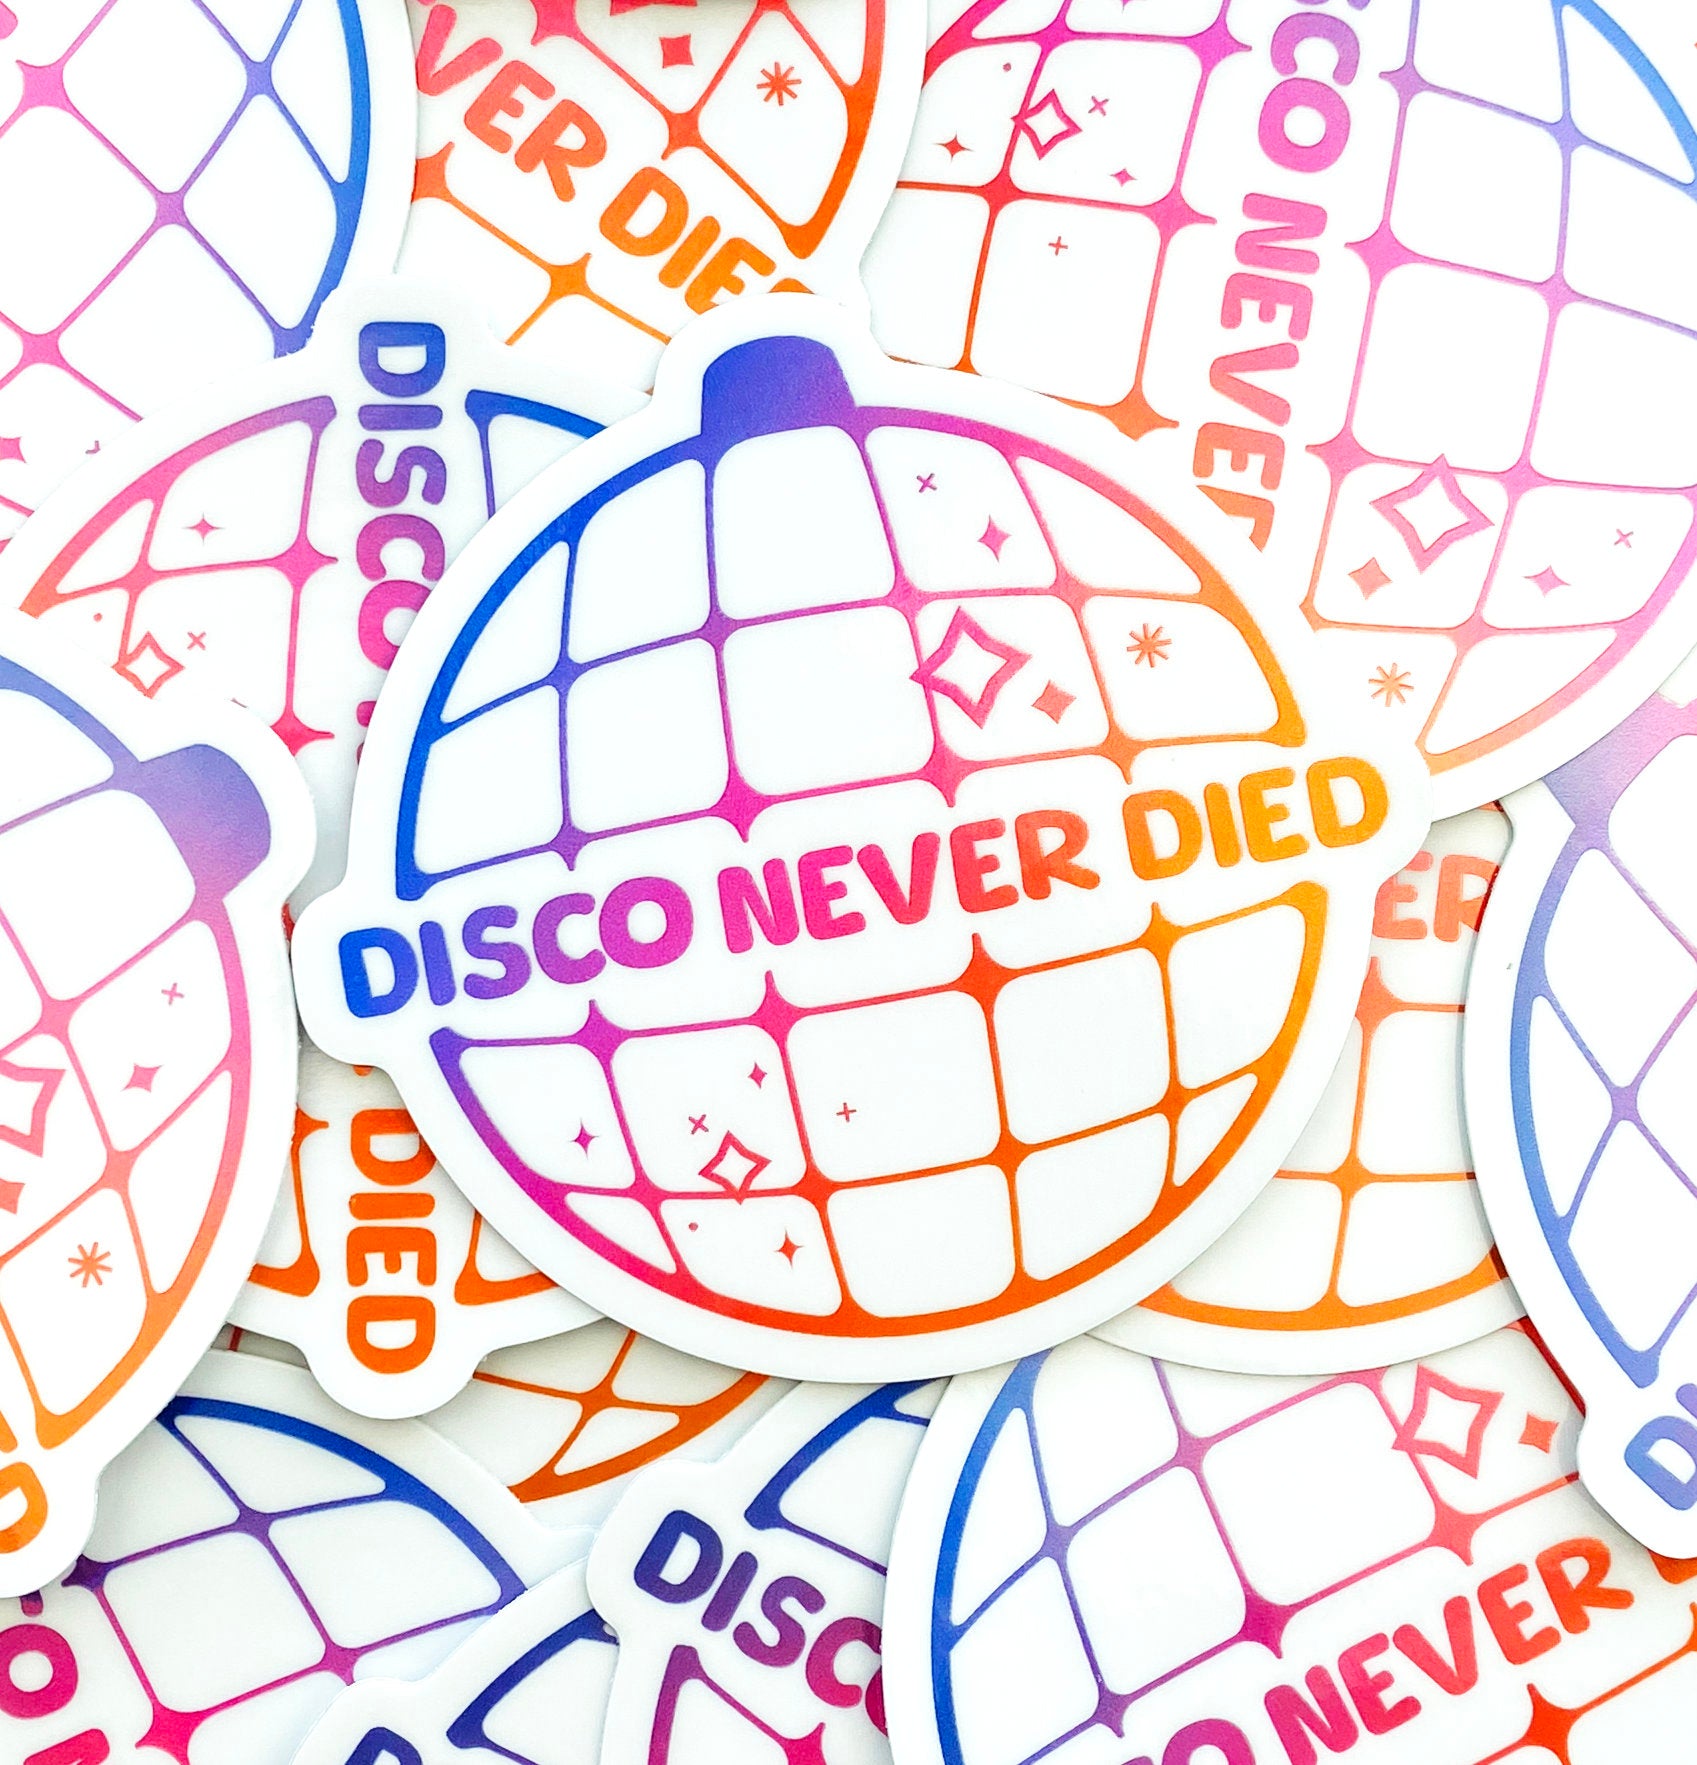 A pile of holographic "Disco Never Died" stickers which feature a purple to pink to orange gradient..